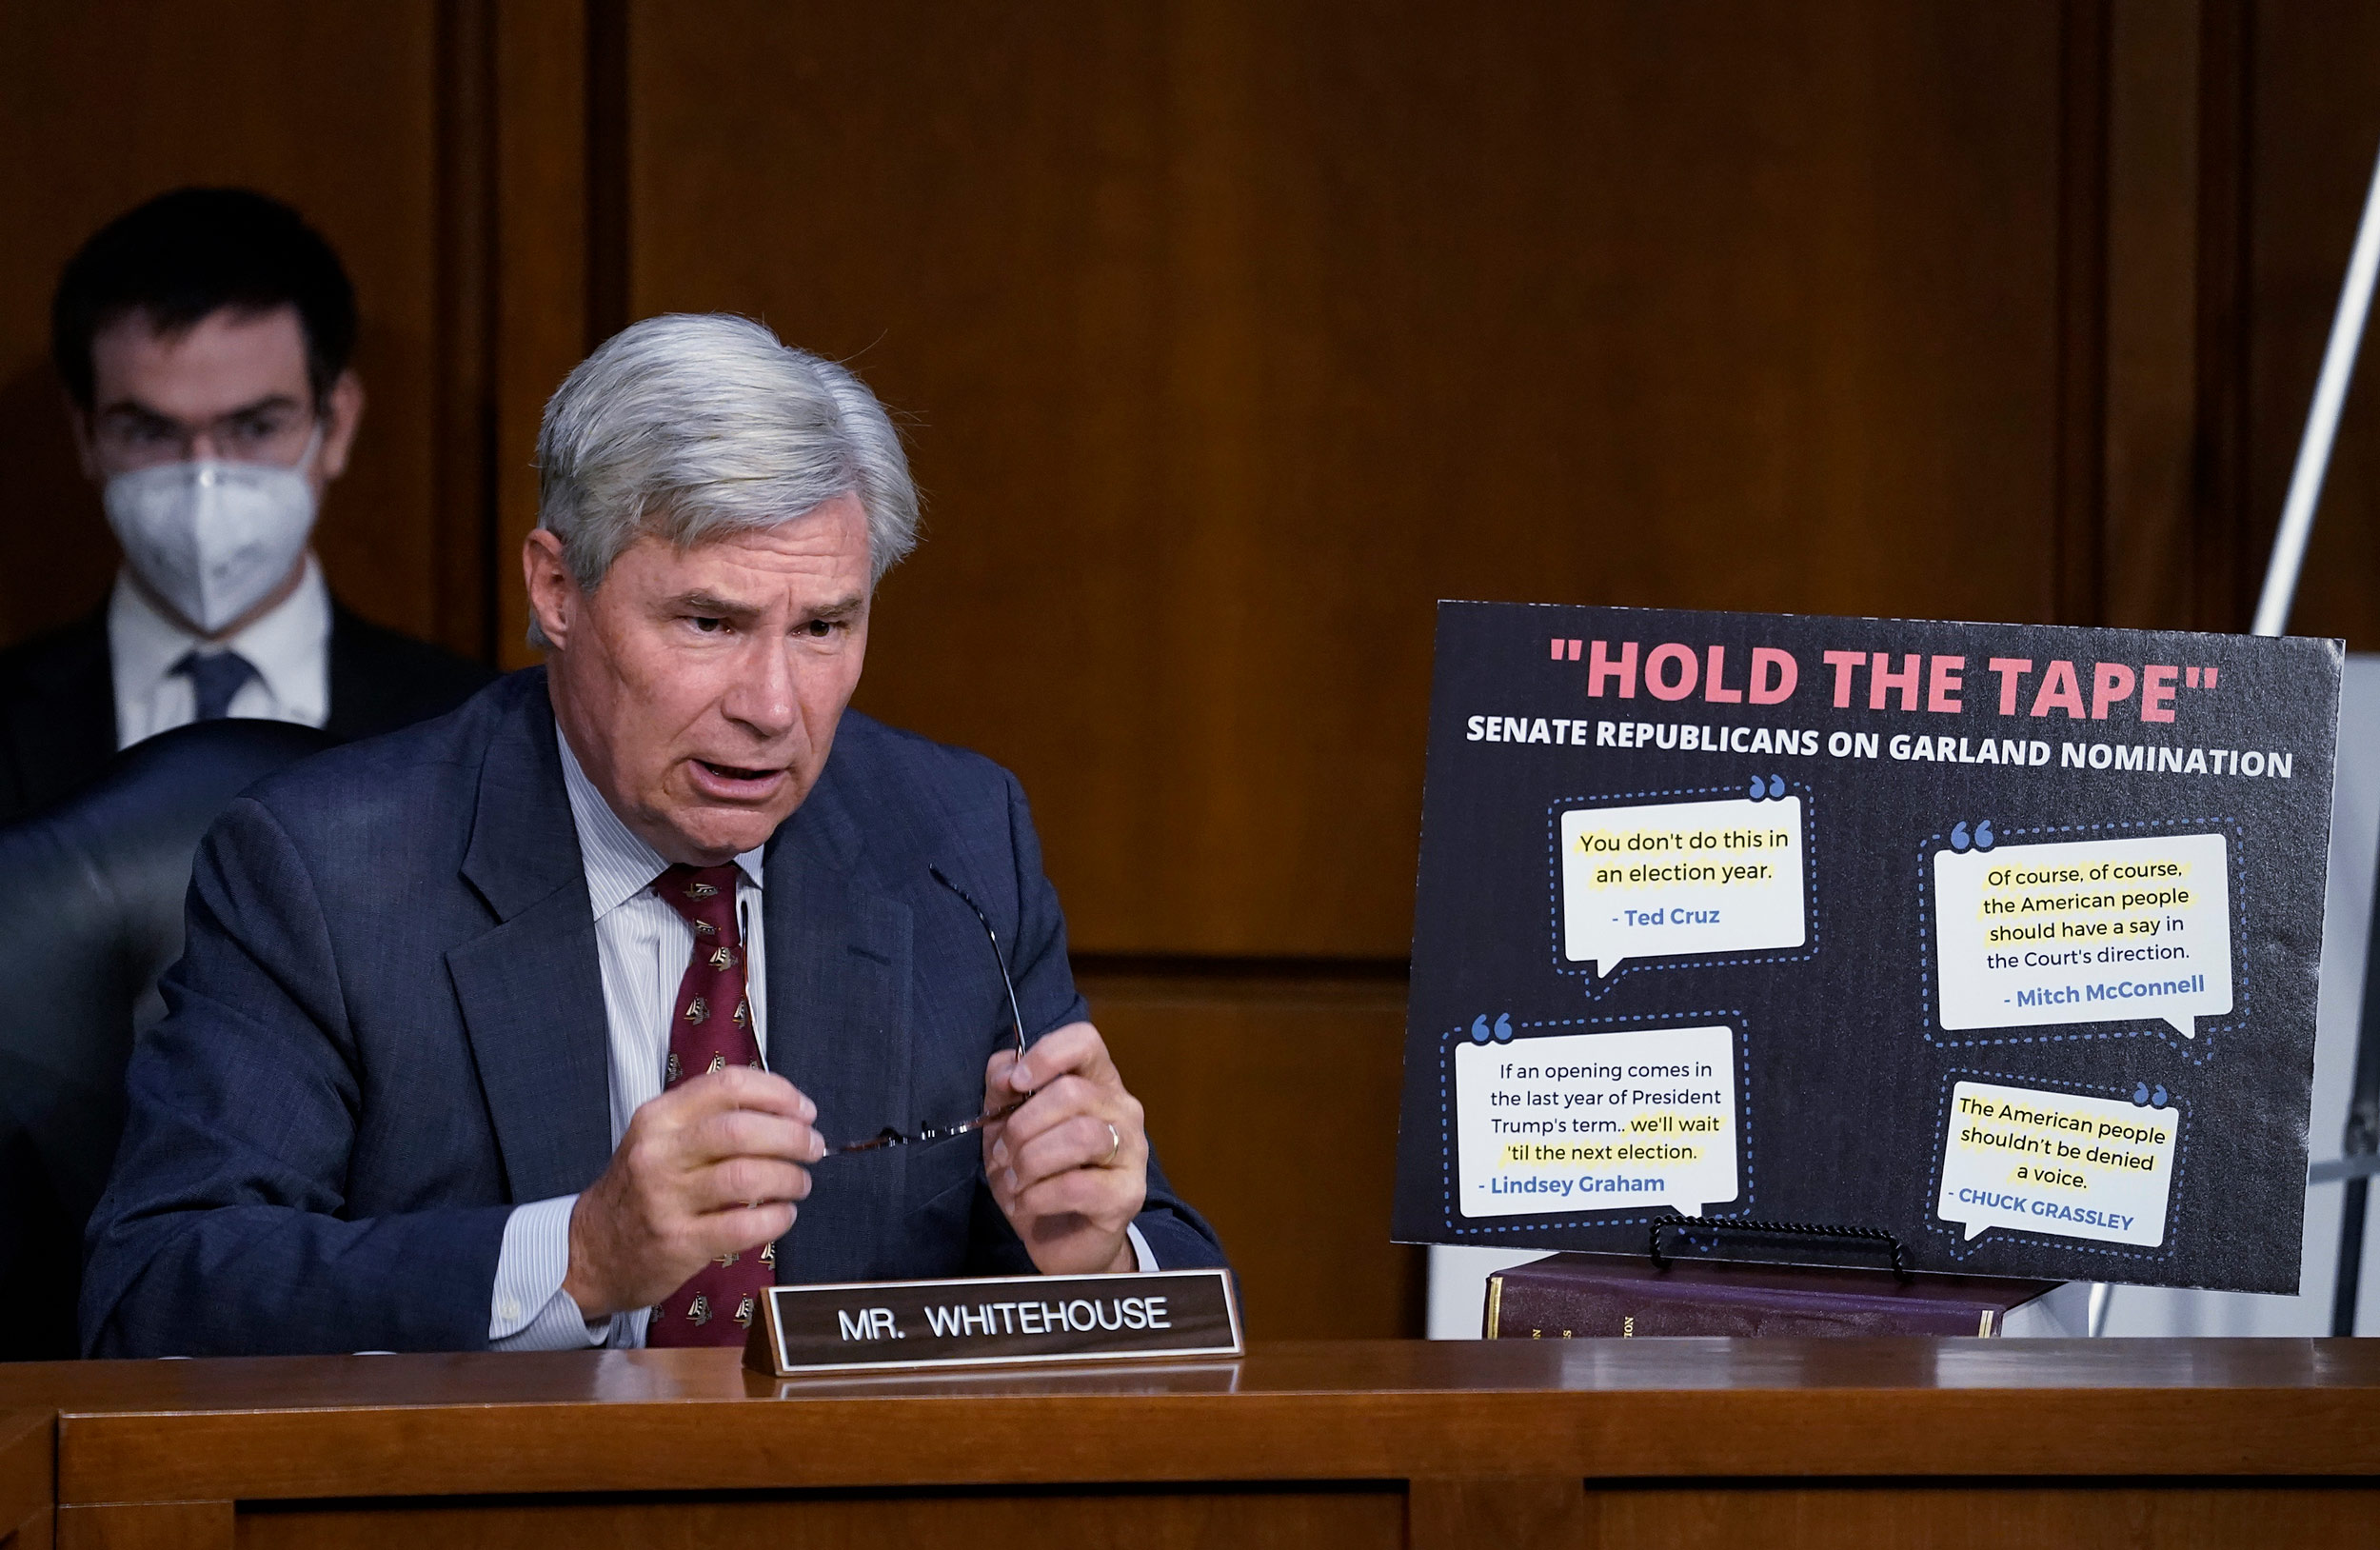 Sen. Sheldon Whitehouse speaks while displaying a sign during Supreme Court nominee Judge Amy Coney Barrett's confirmation hearing before the Senate Judiciary Committee on Capitol Hill in Washington, DC, on October 13.